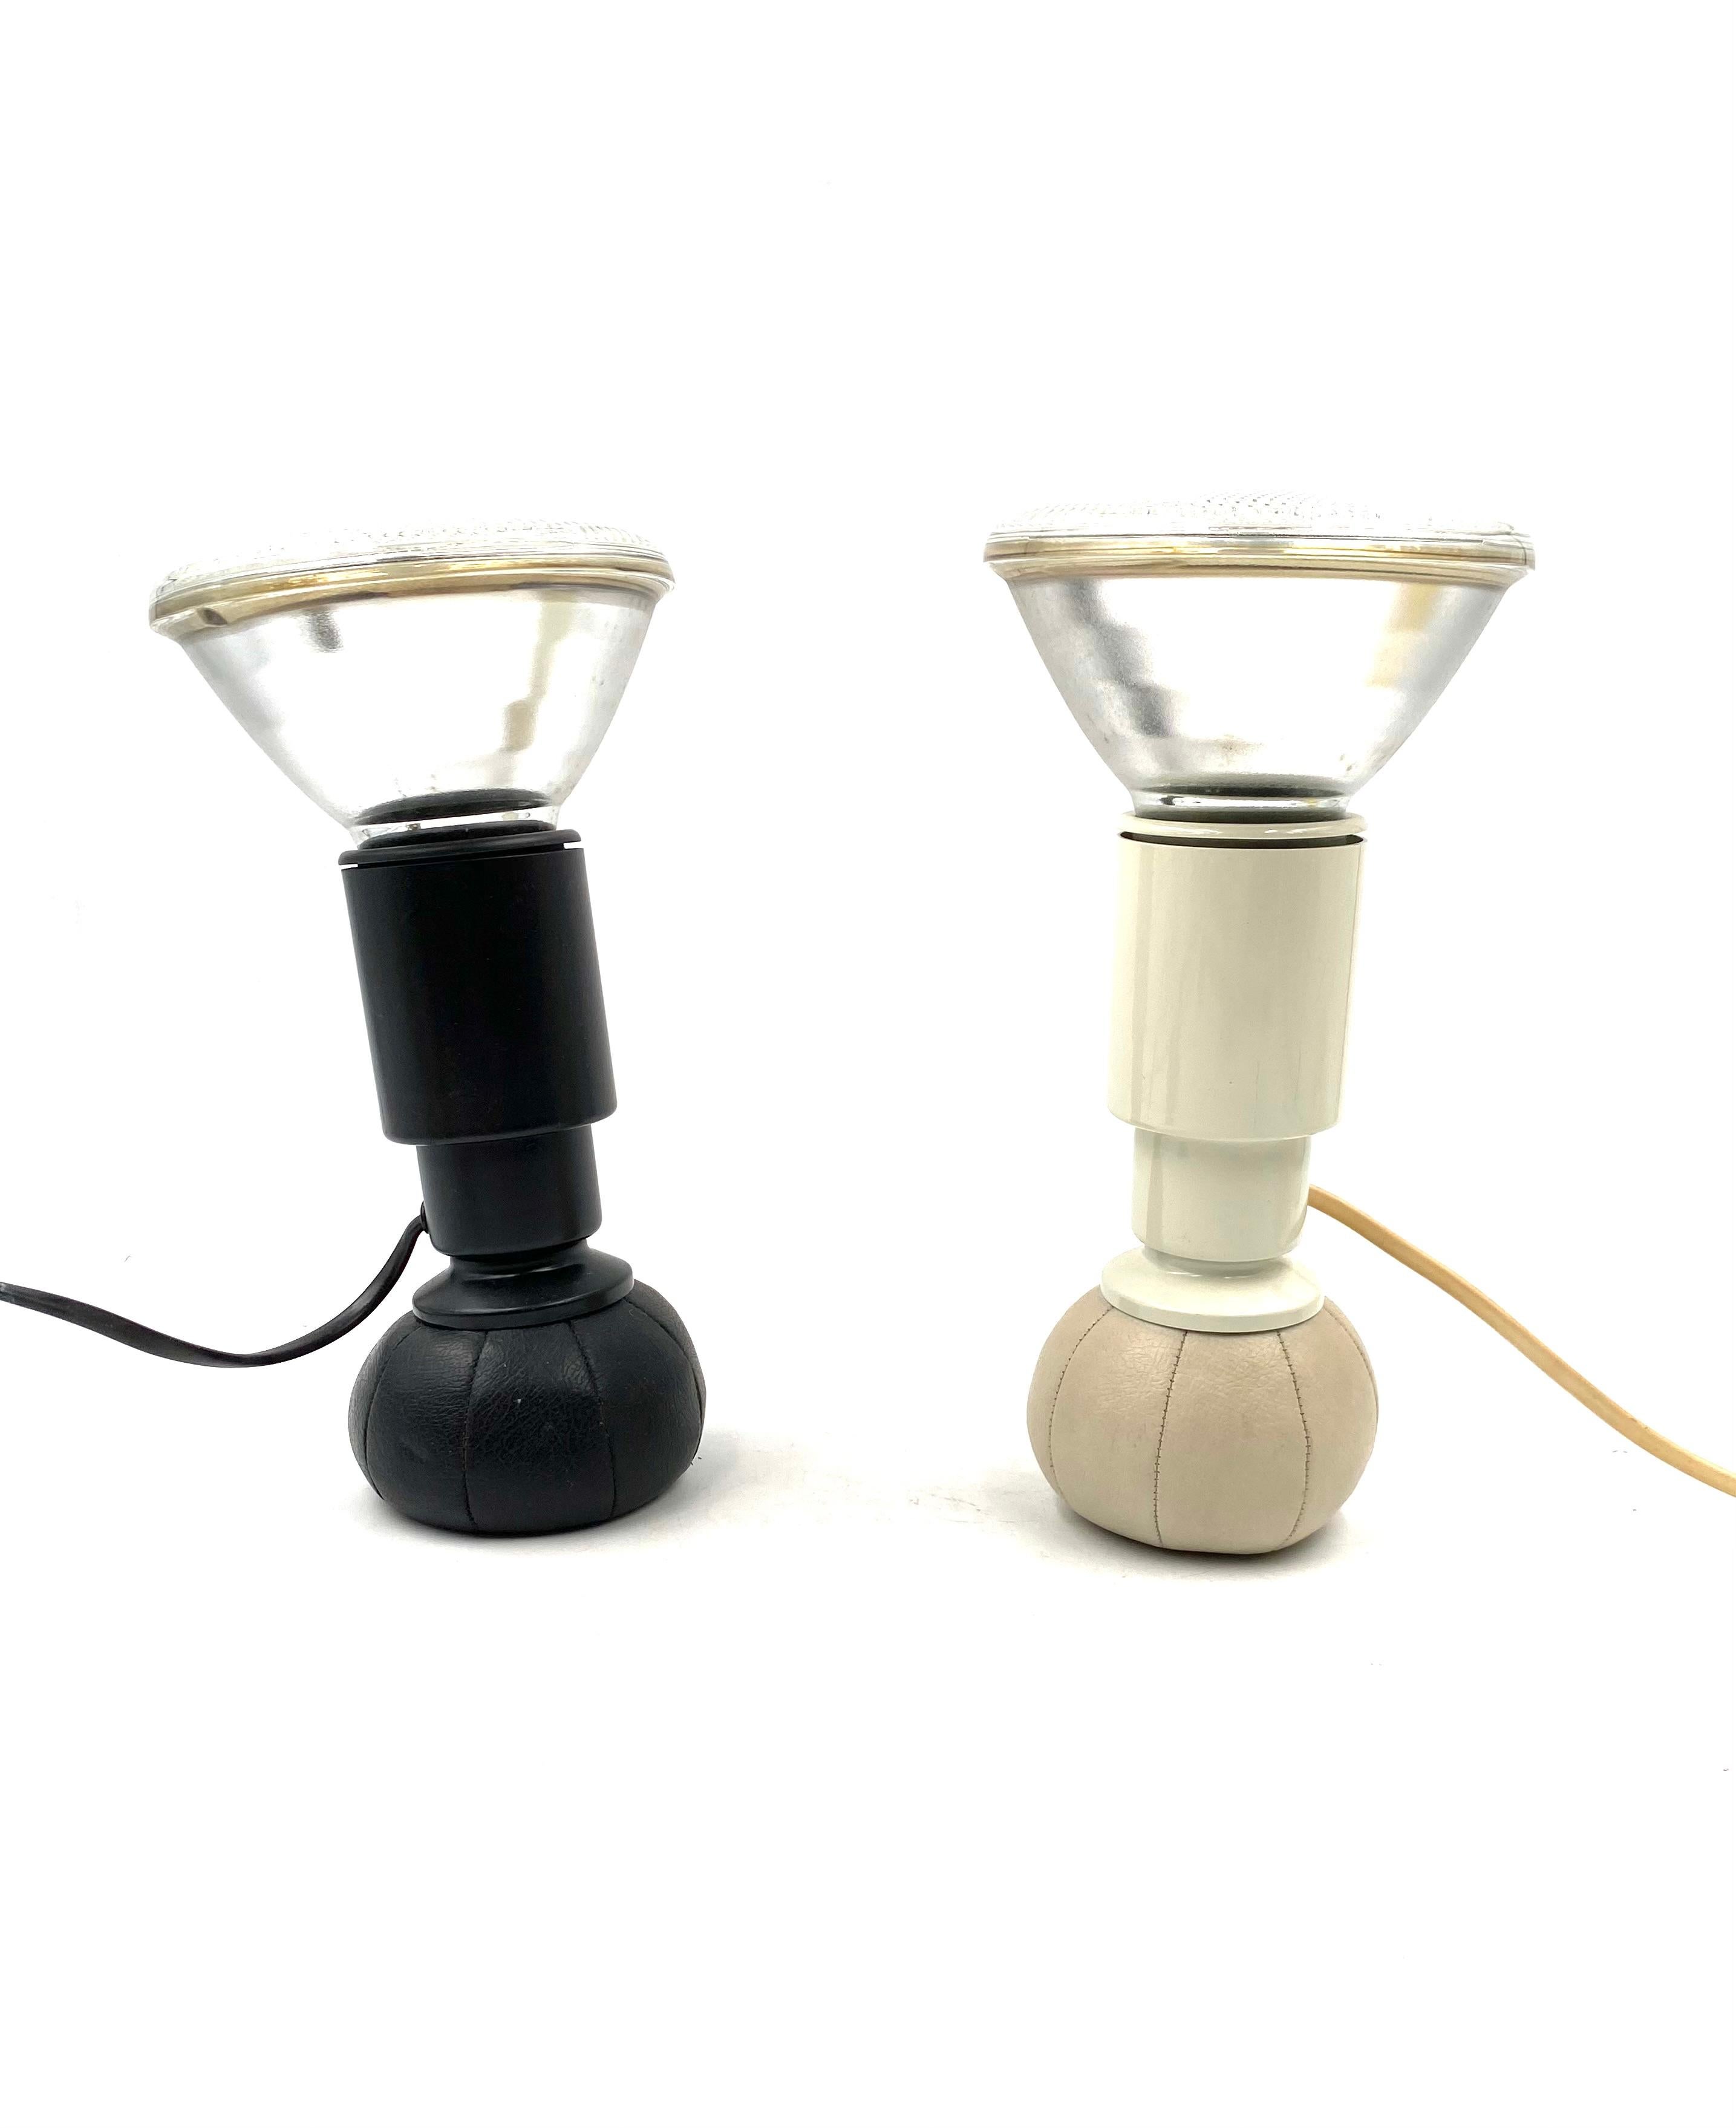 Set of 2 black & white table lamps mod. 600/C designed by master Gino Sarfatti, manufactured by his own Arteluce.

Designed in 1966, produced 1960 - 1969

Lacquered aluminium. The leather base is filled with small lead balls which allow the lamp